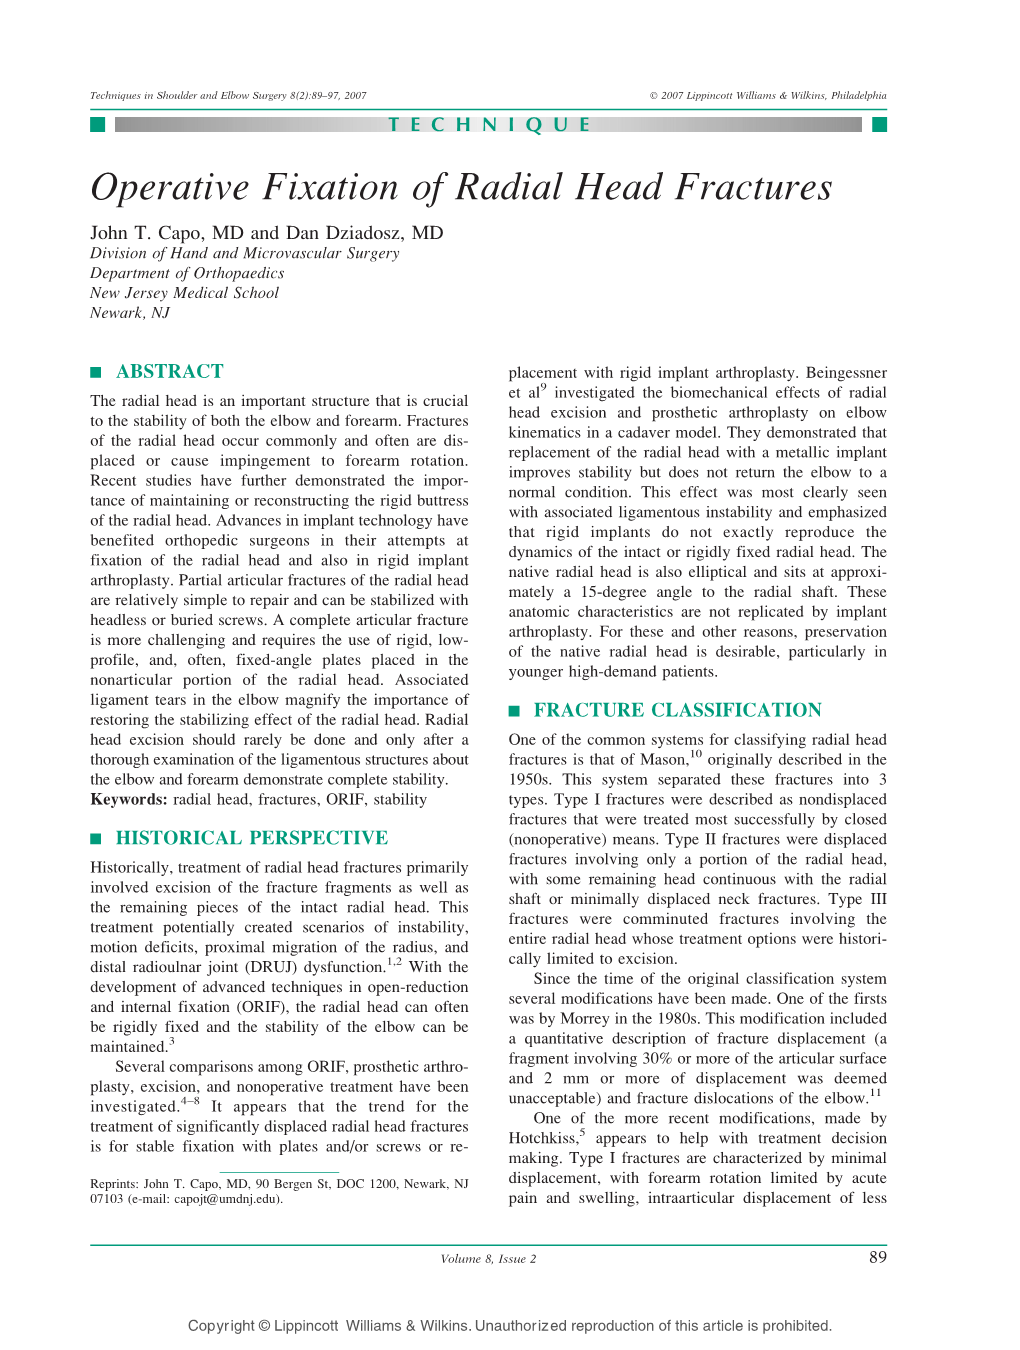 Operative Fixation of Radial Head Fractures John T